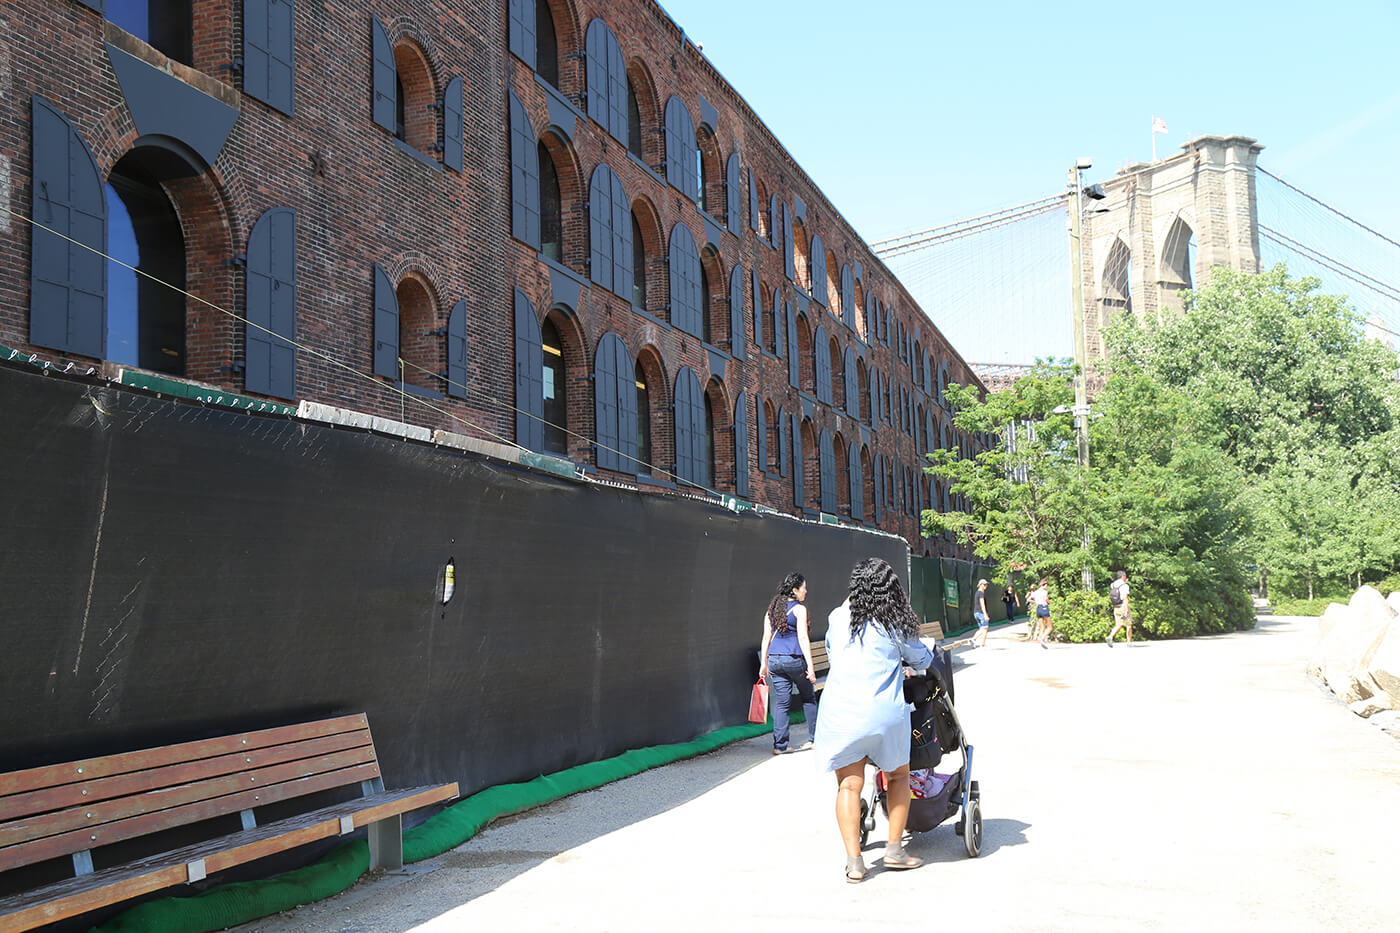 empire-stores-west-elm-dumbo-brooklyn-opening-august-2016